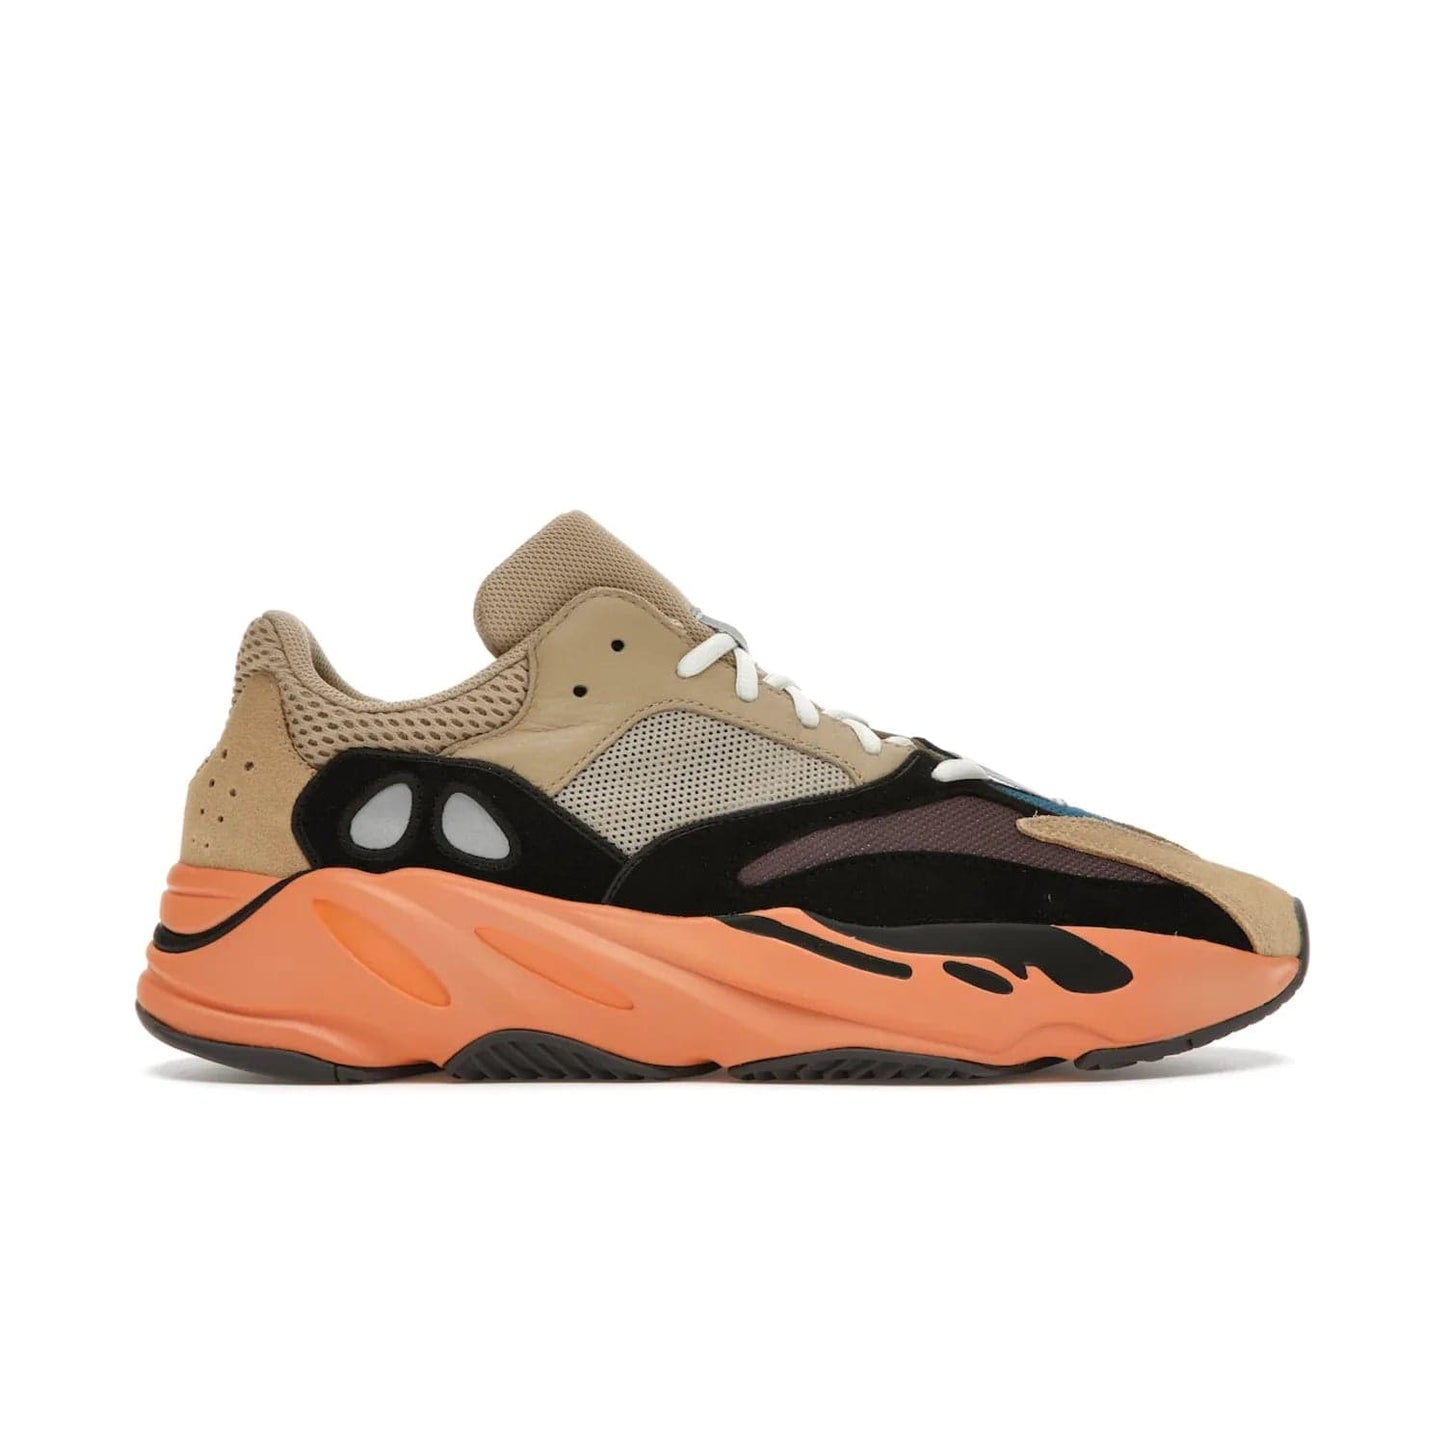 adidas Yeezy Boost 700 Enflame Amber - Image 1 - Only at www.BallersClubKickz.com - Adidas Yeezy Boost 700 Enflame Amber: Eye-catching design with pale yellow, brown, teal, and orange! Get yours in June 2021.